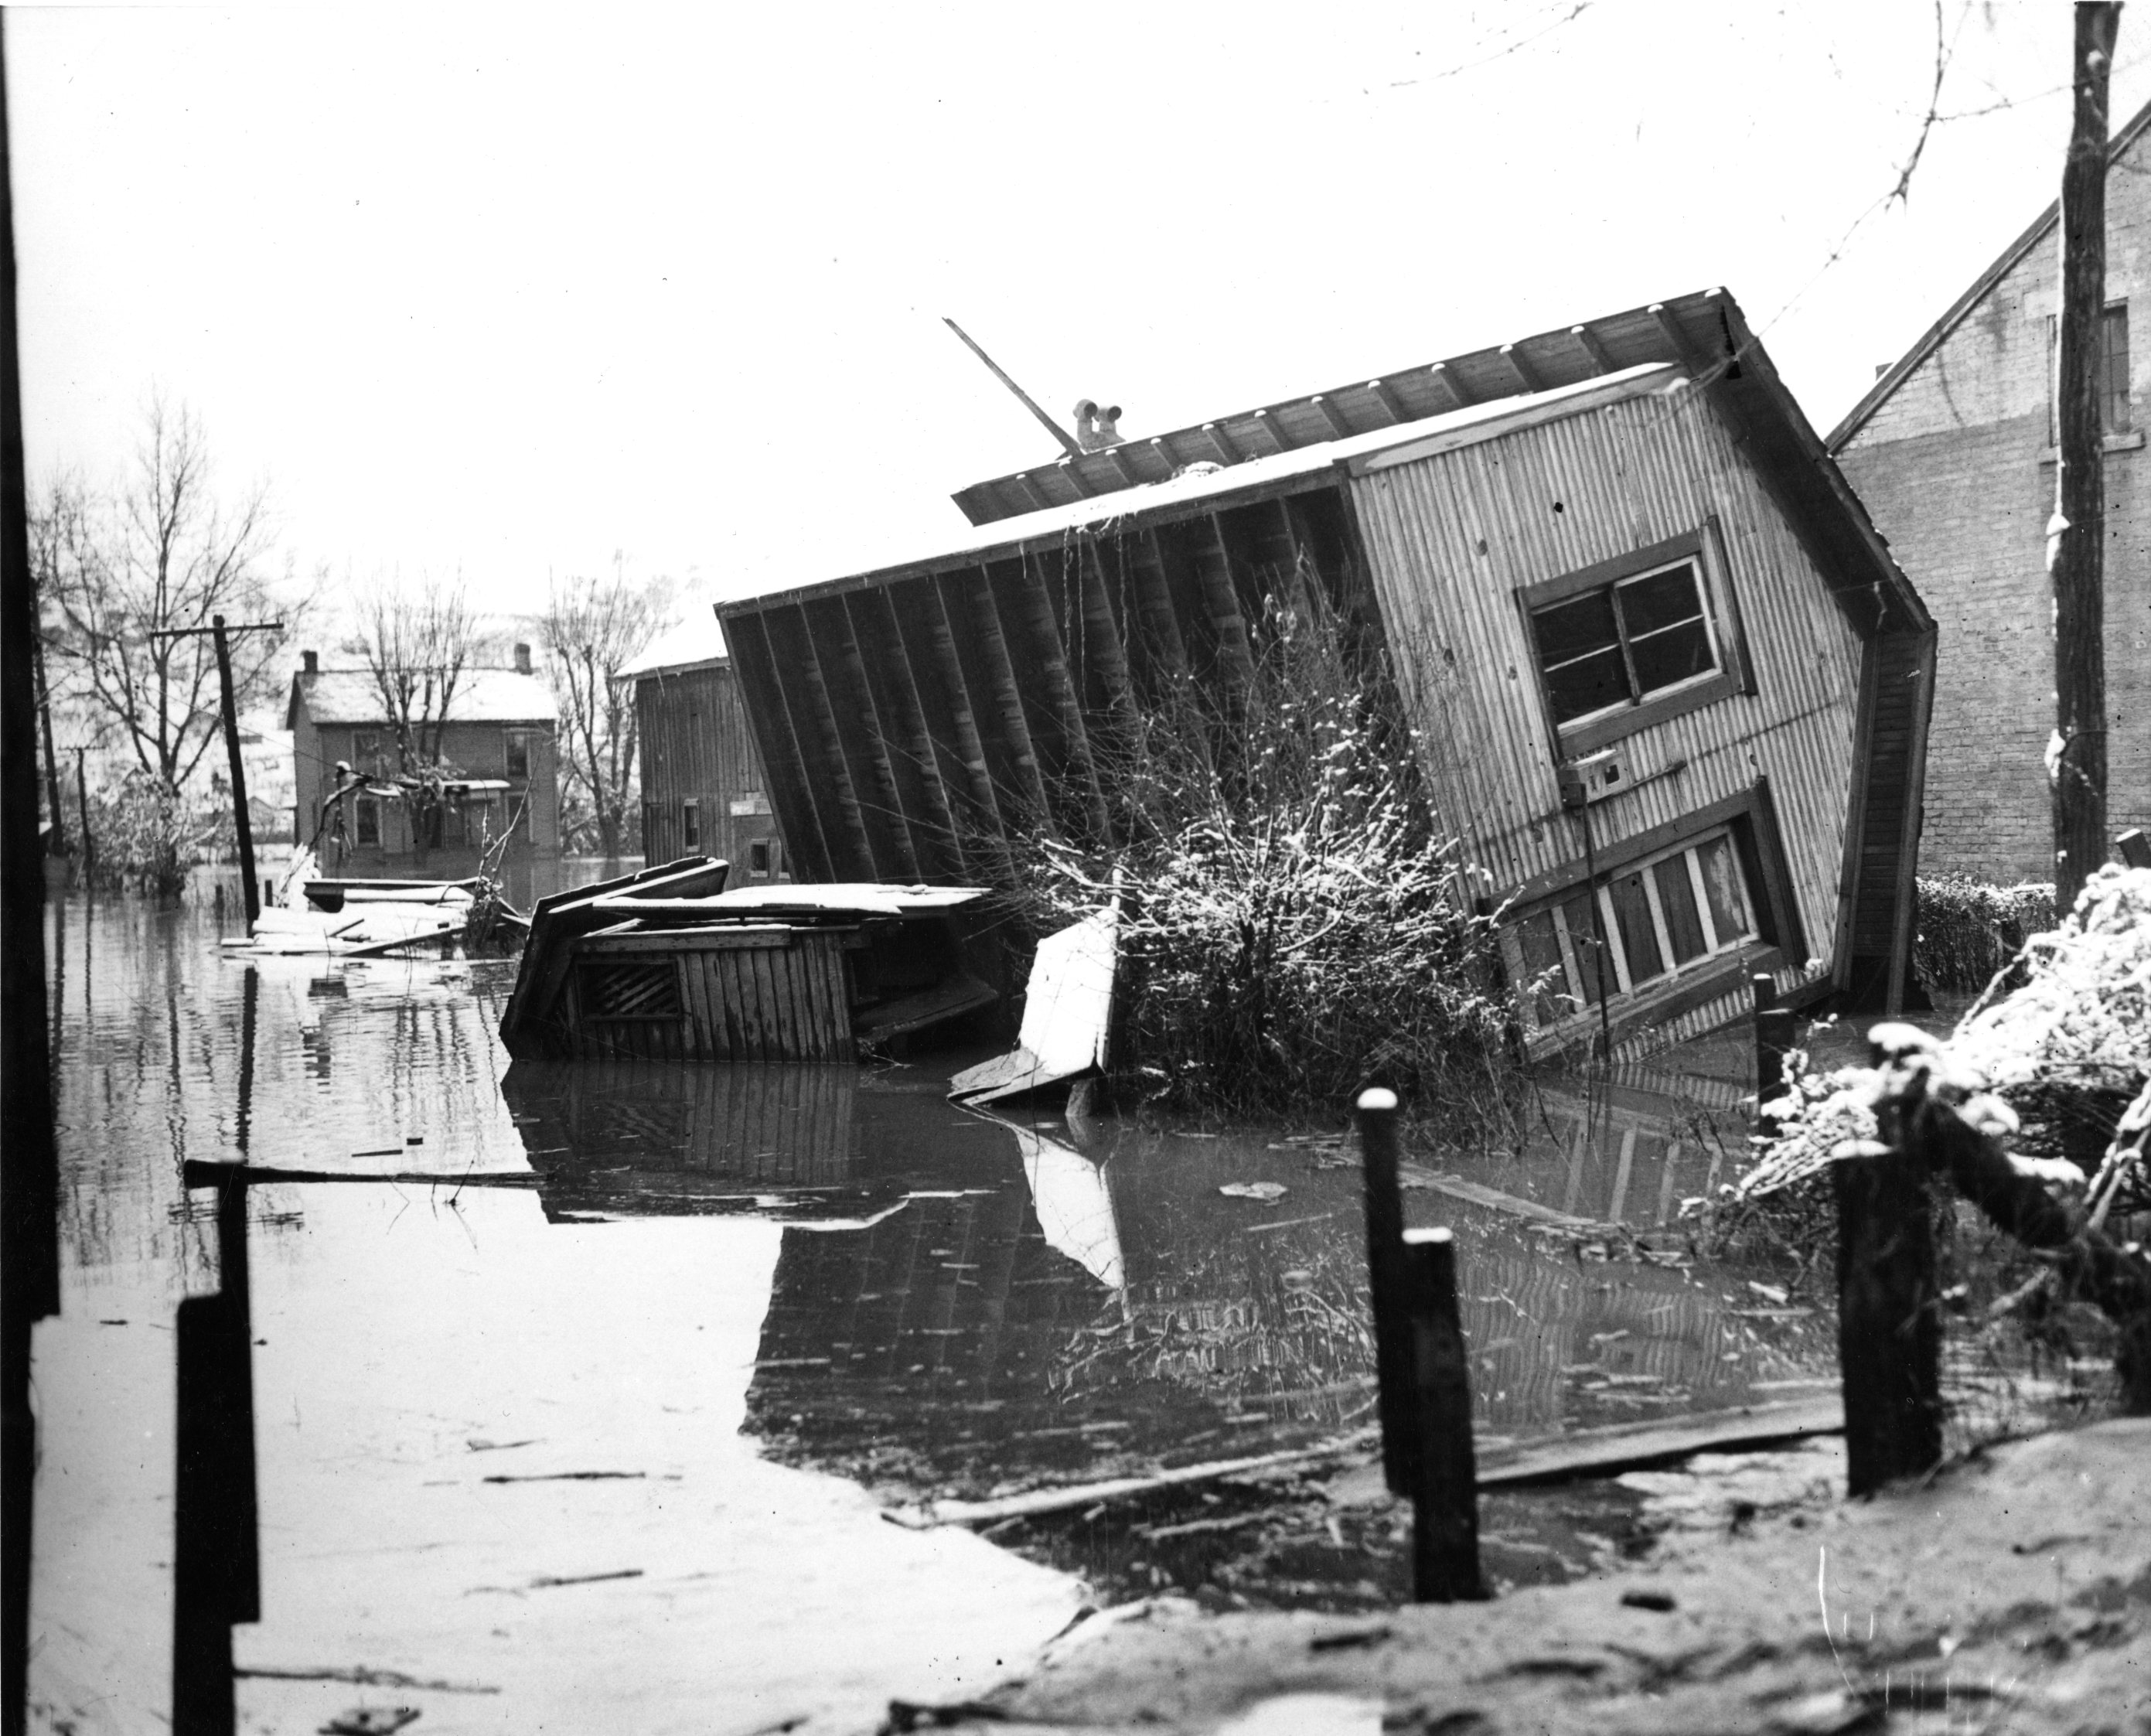 2.	Floodwaters float a house off its foundation in Powhatan, Ohio, Jan. 1937. (U.S. Coast Guard)